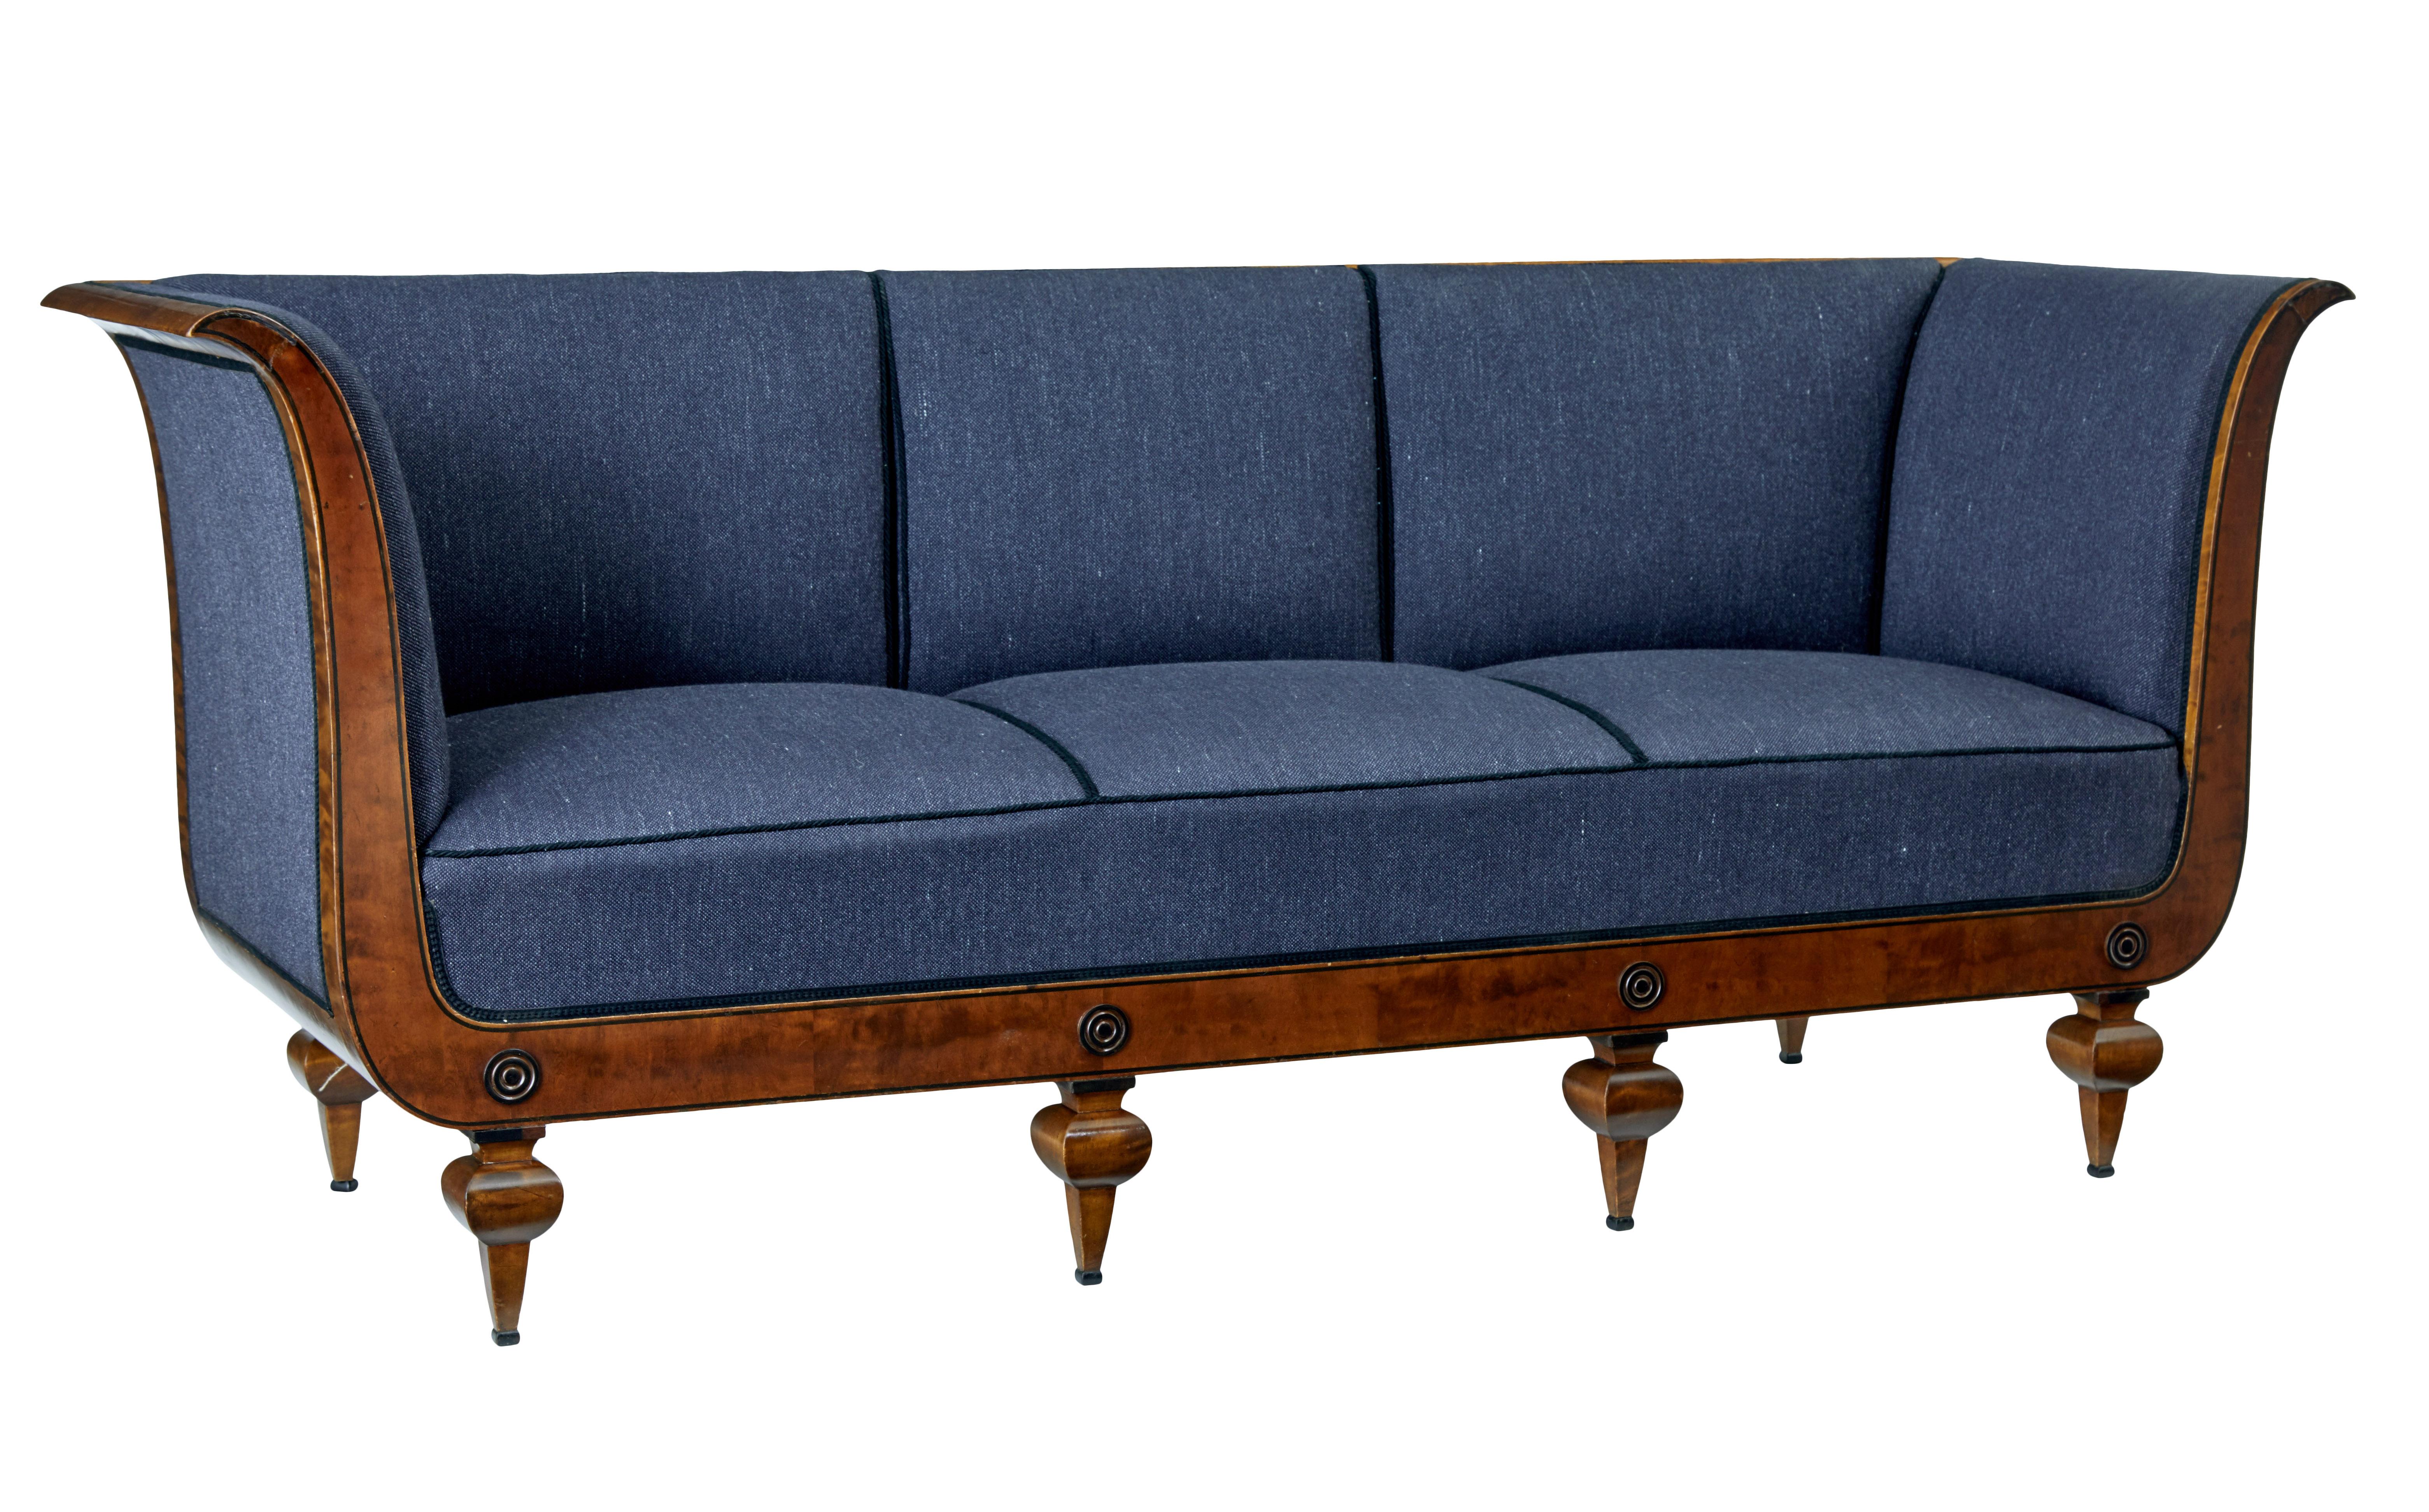 Superb quality Art Deco period sofa attributed to David Blomberg.

3-seat sofa, scrolling arms with ebony inlay down the arms and along the front frieze. Decorated with applied roundels and standing on 6 shaped legs.

Upholstery in good